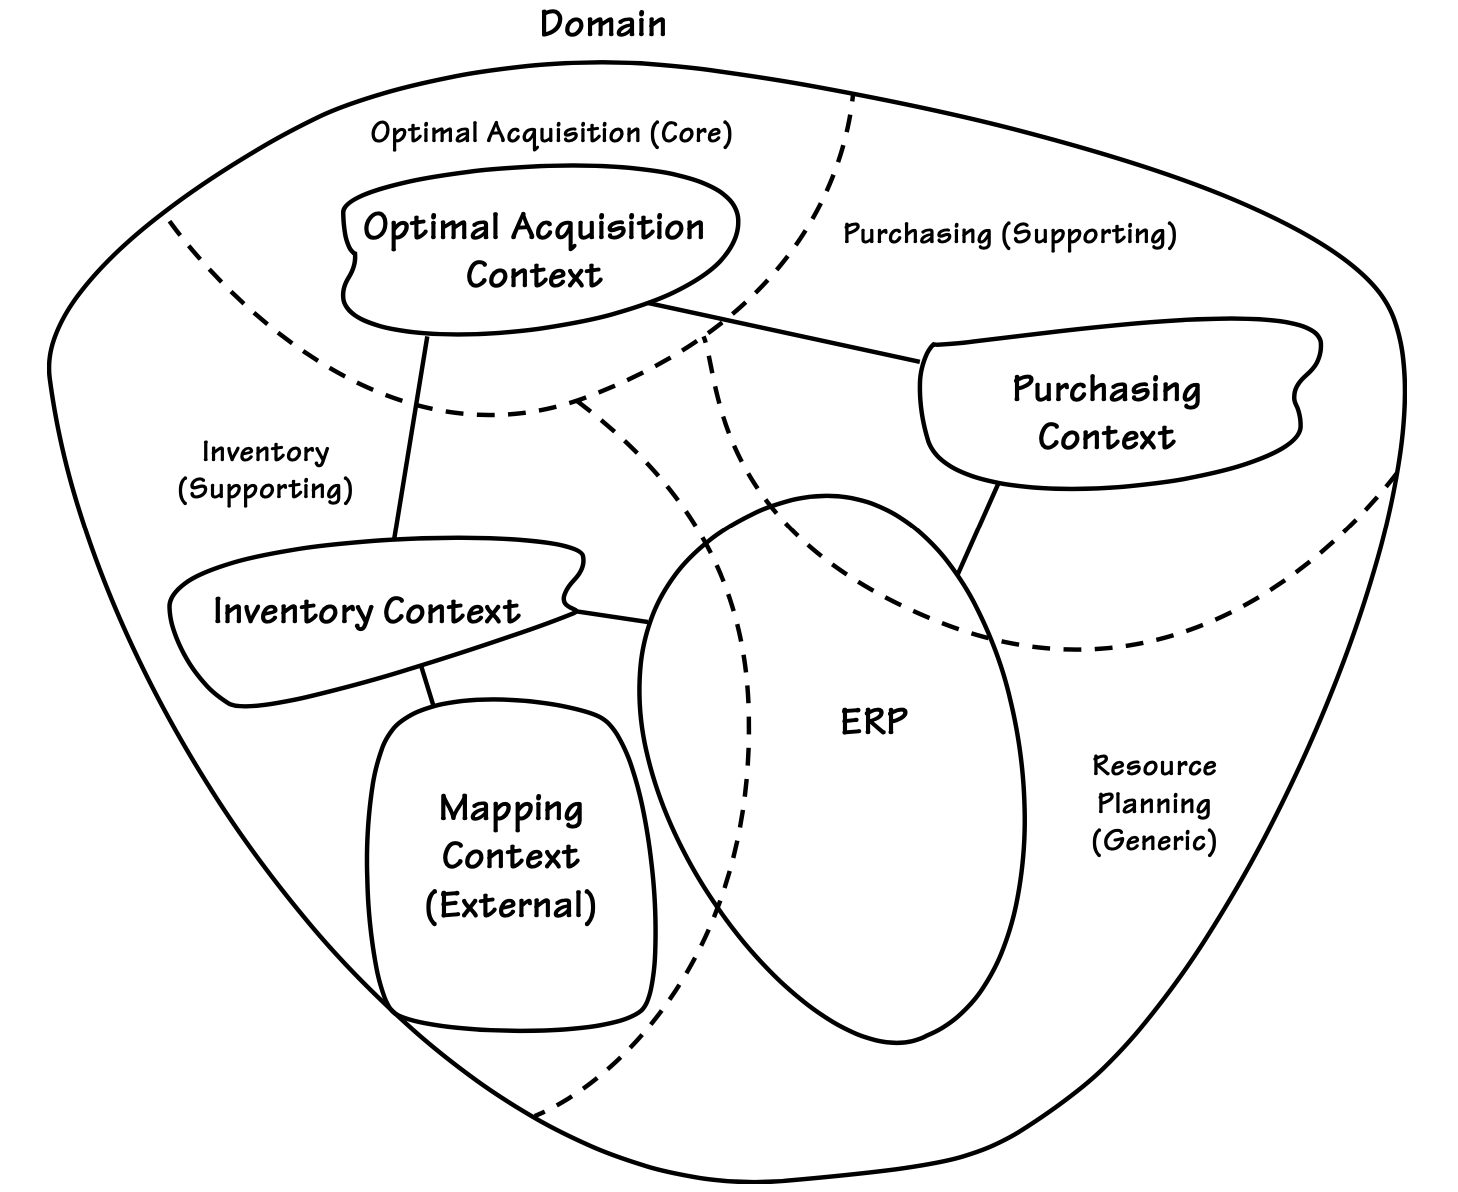 The Core Domain and other Subdomains involved in purchasing and inventory